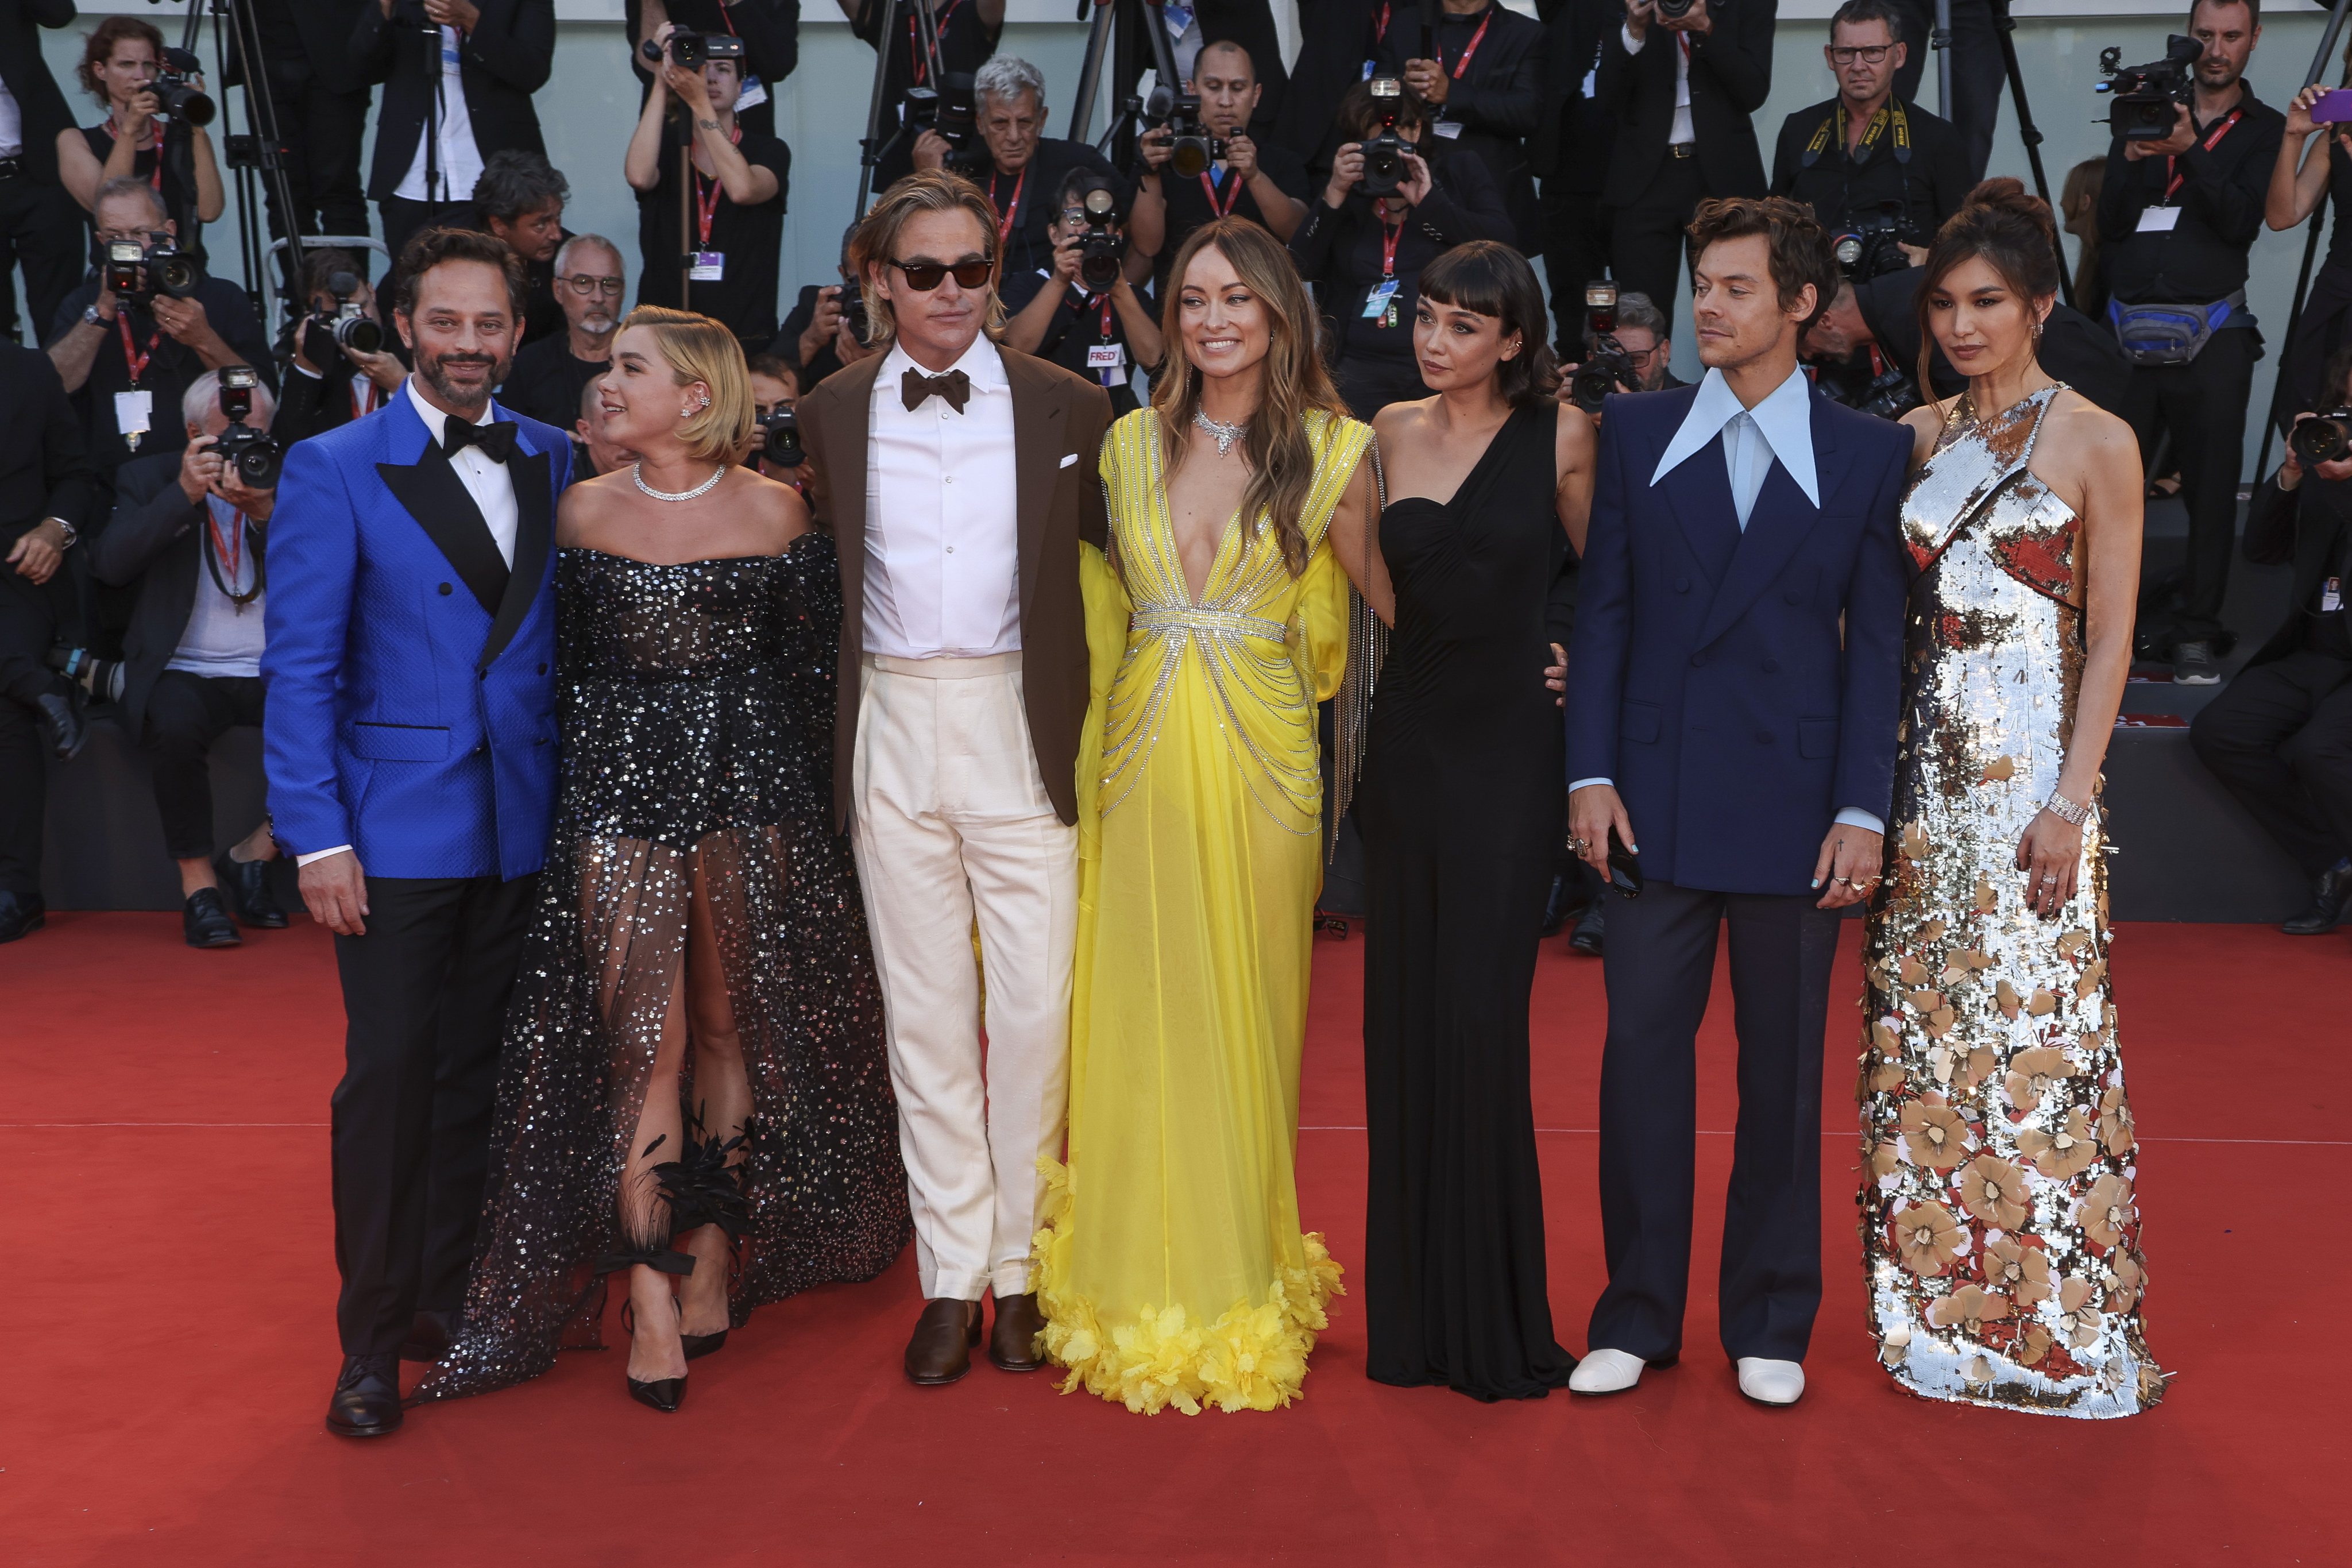 Gemma Chan, Harry Styles, Sydney Chandler, director Olivia Wilde, Chris Pine, Florence Pugh and Nick Kroll pose for photographers on the red carpet in Venice ahead of the premiere of the film Don’t Worry Darling. Photo by Joel C Ryan/Invision/AP